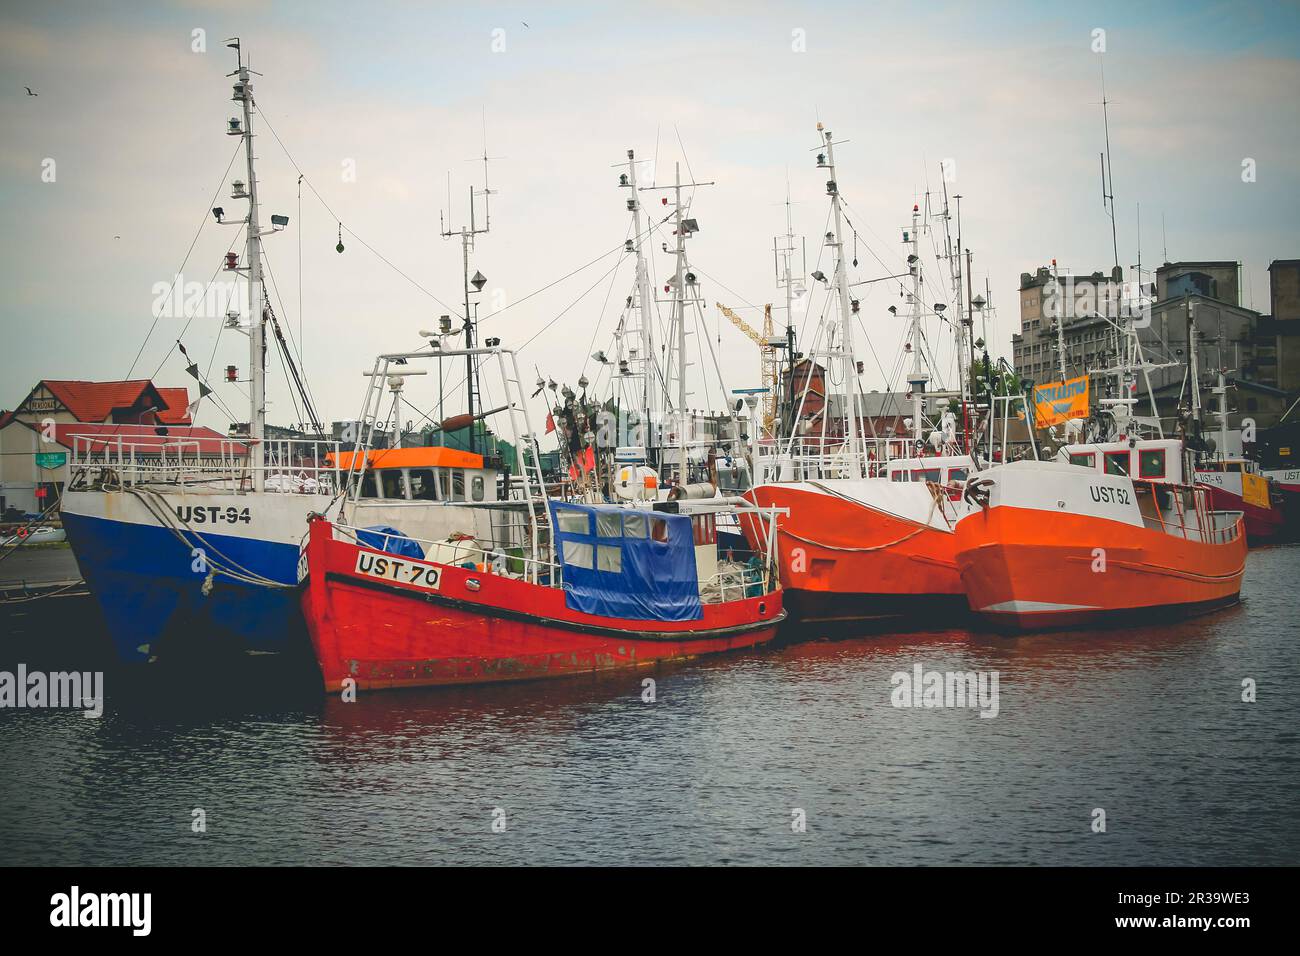 Fishing boats moored in port Stock Photo